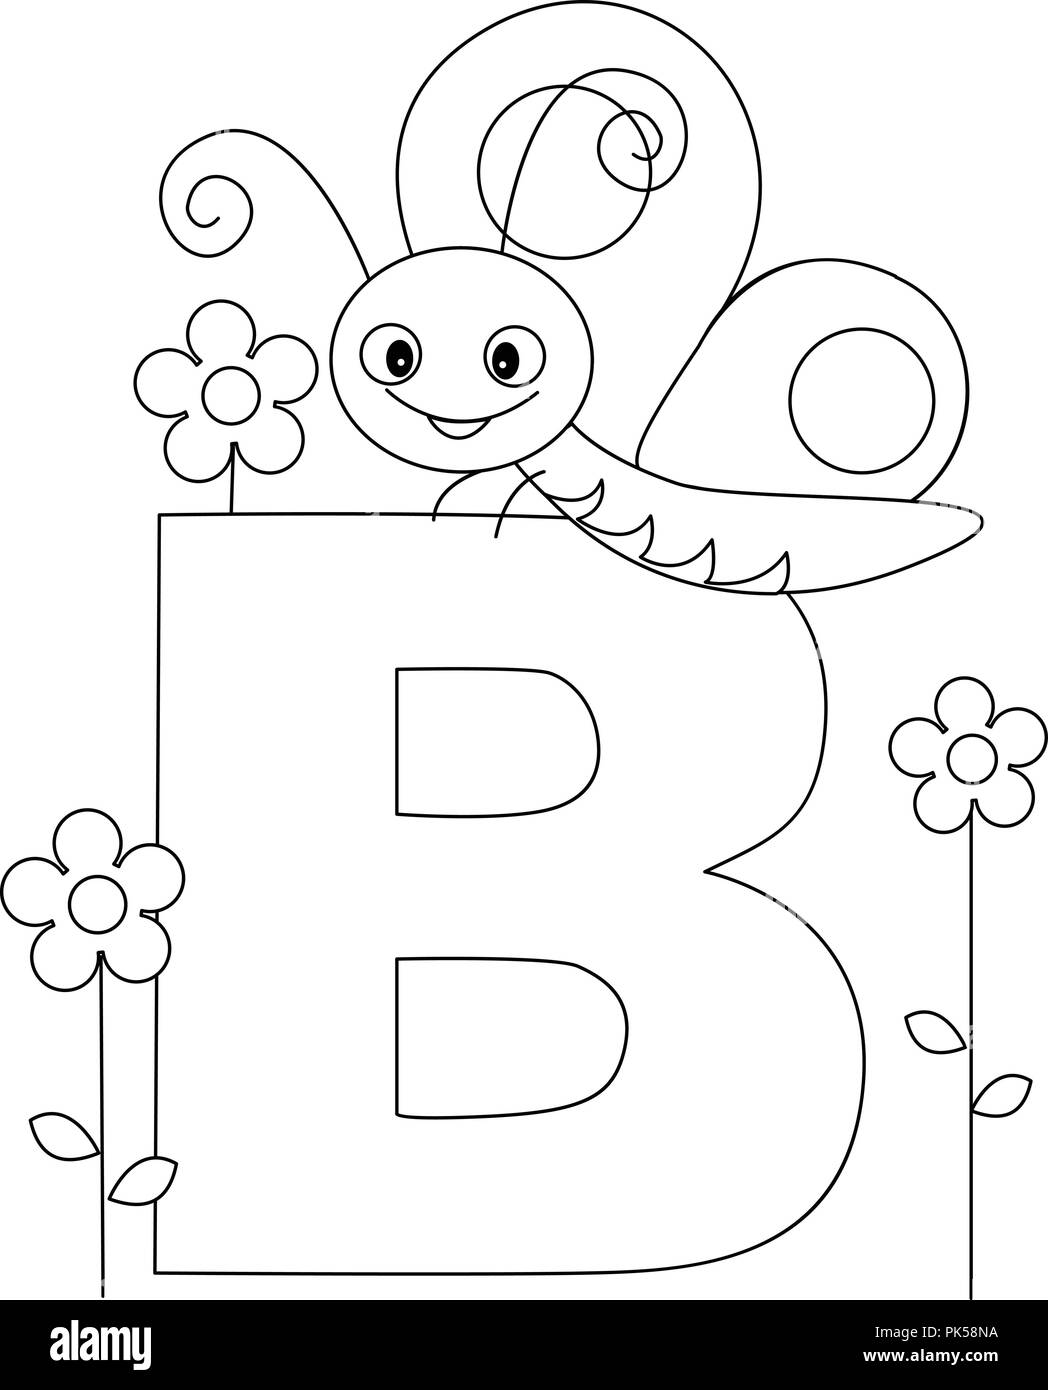 Animal alphabet coloring book illustration with outlined graphics ...